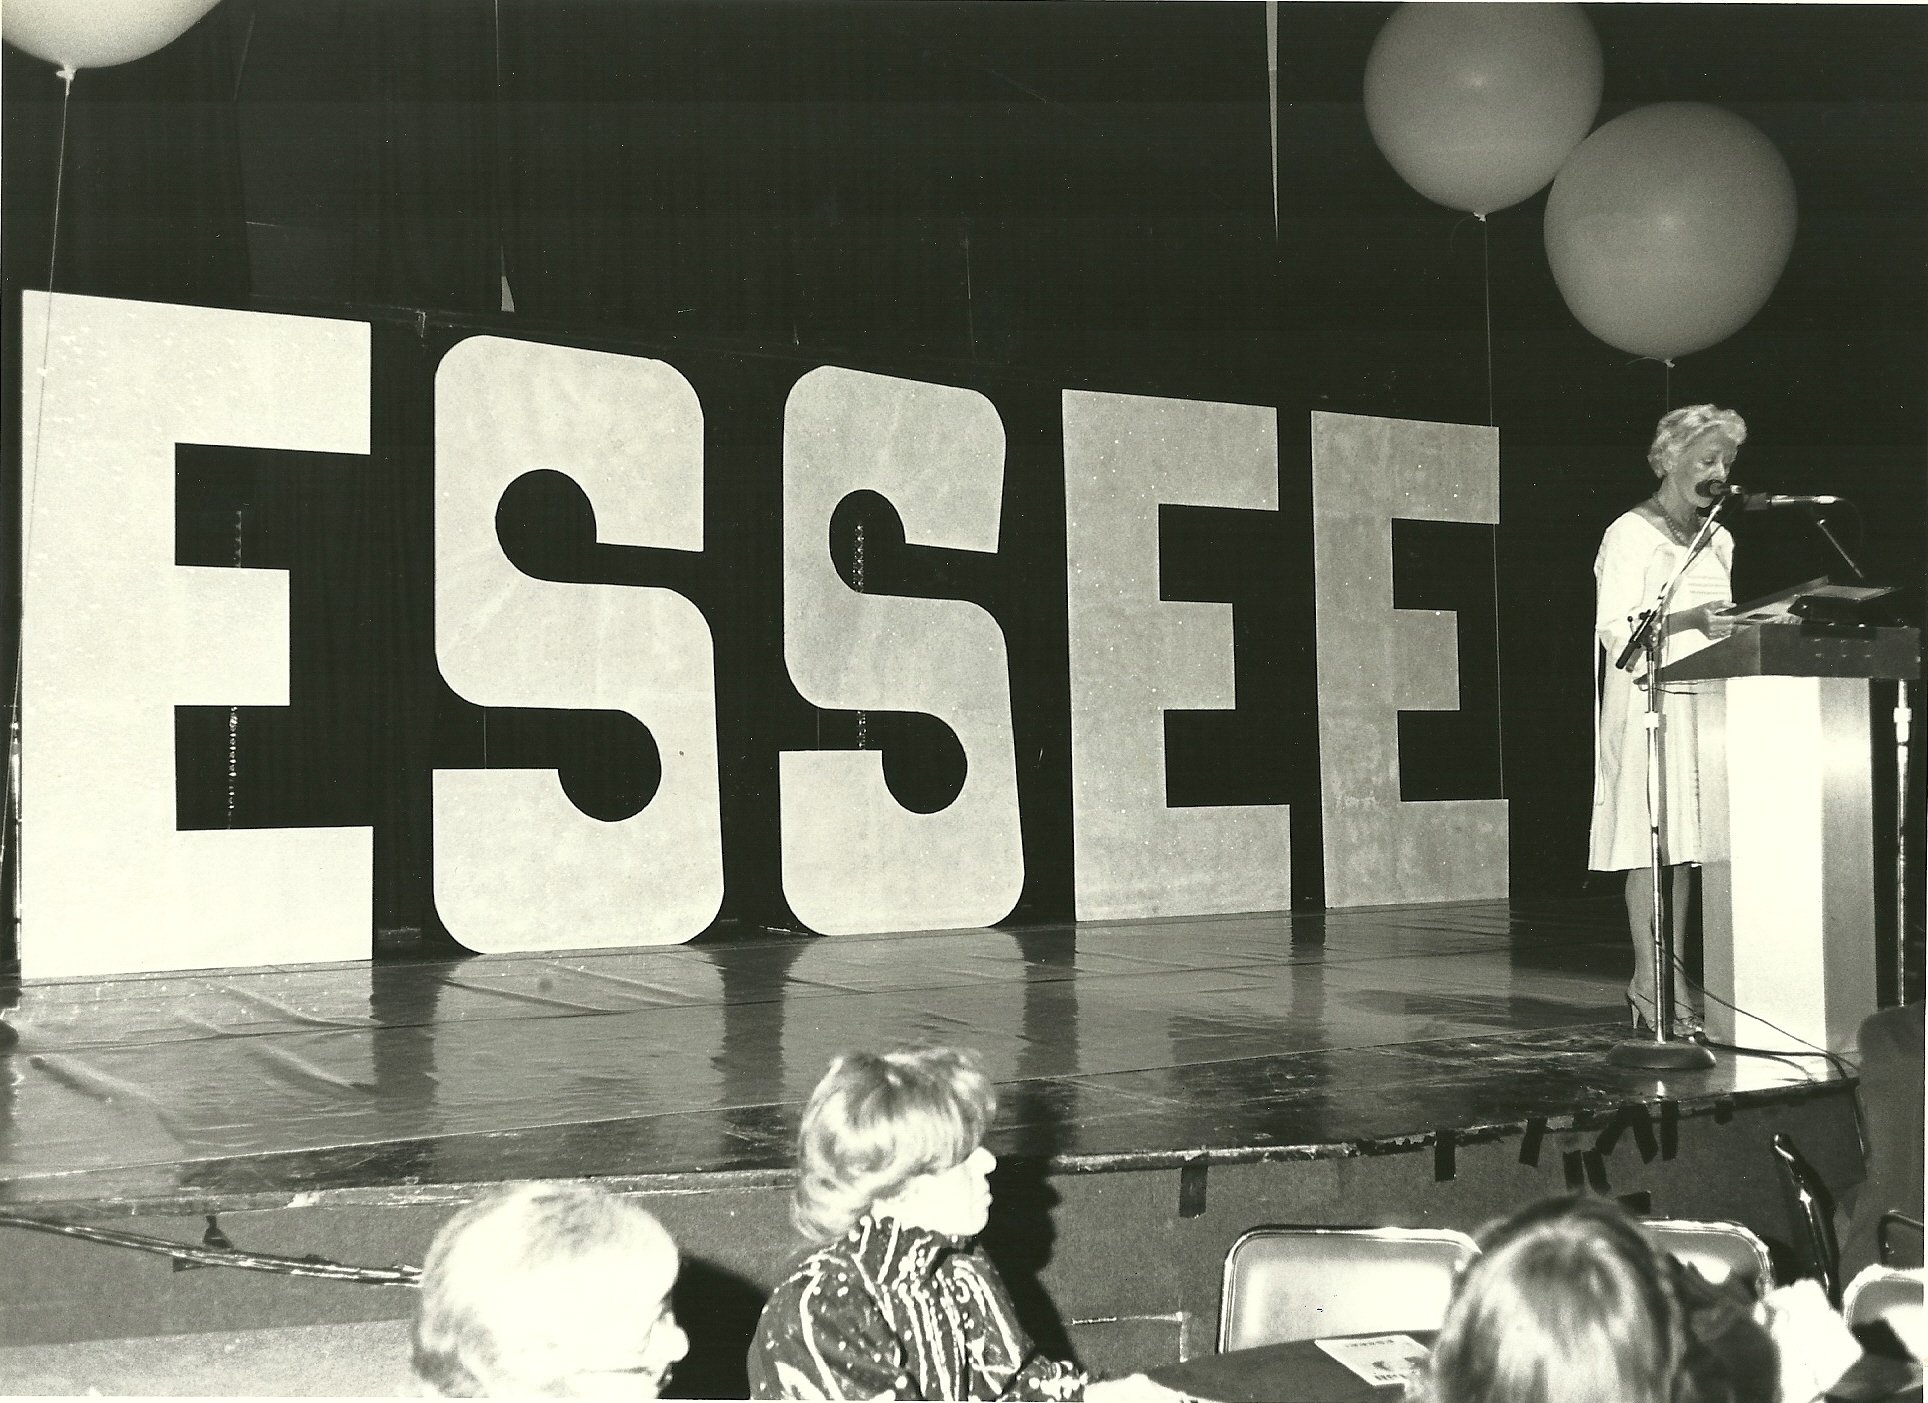 A stage with large block letters spelling out "ESSEE" in the background. The scene is of Mayor Bryne's proclamation for Essee Kupcinet in 1981.